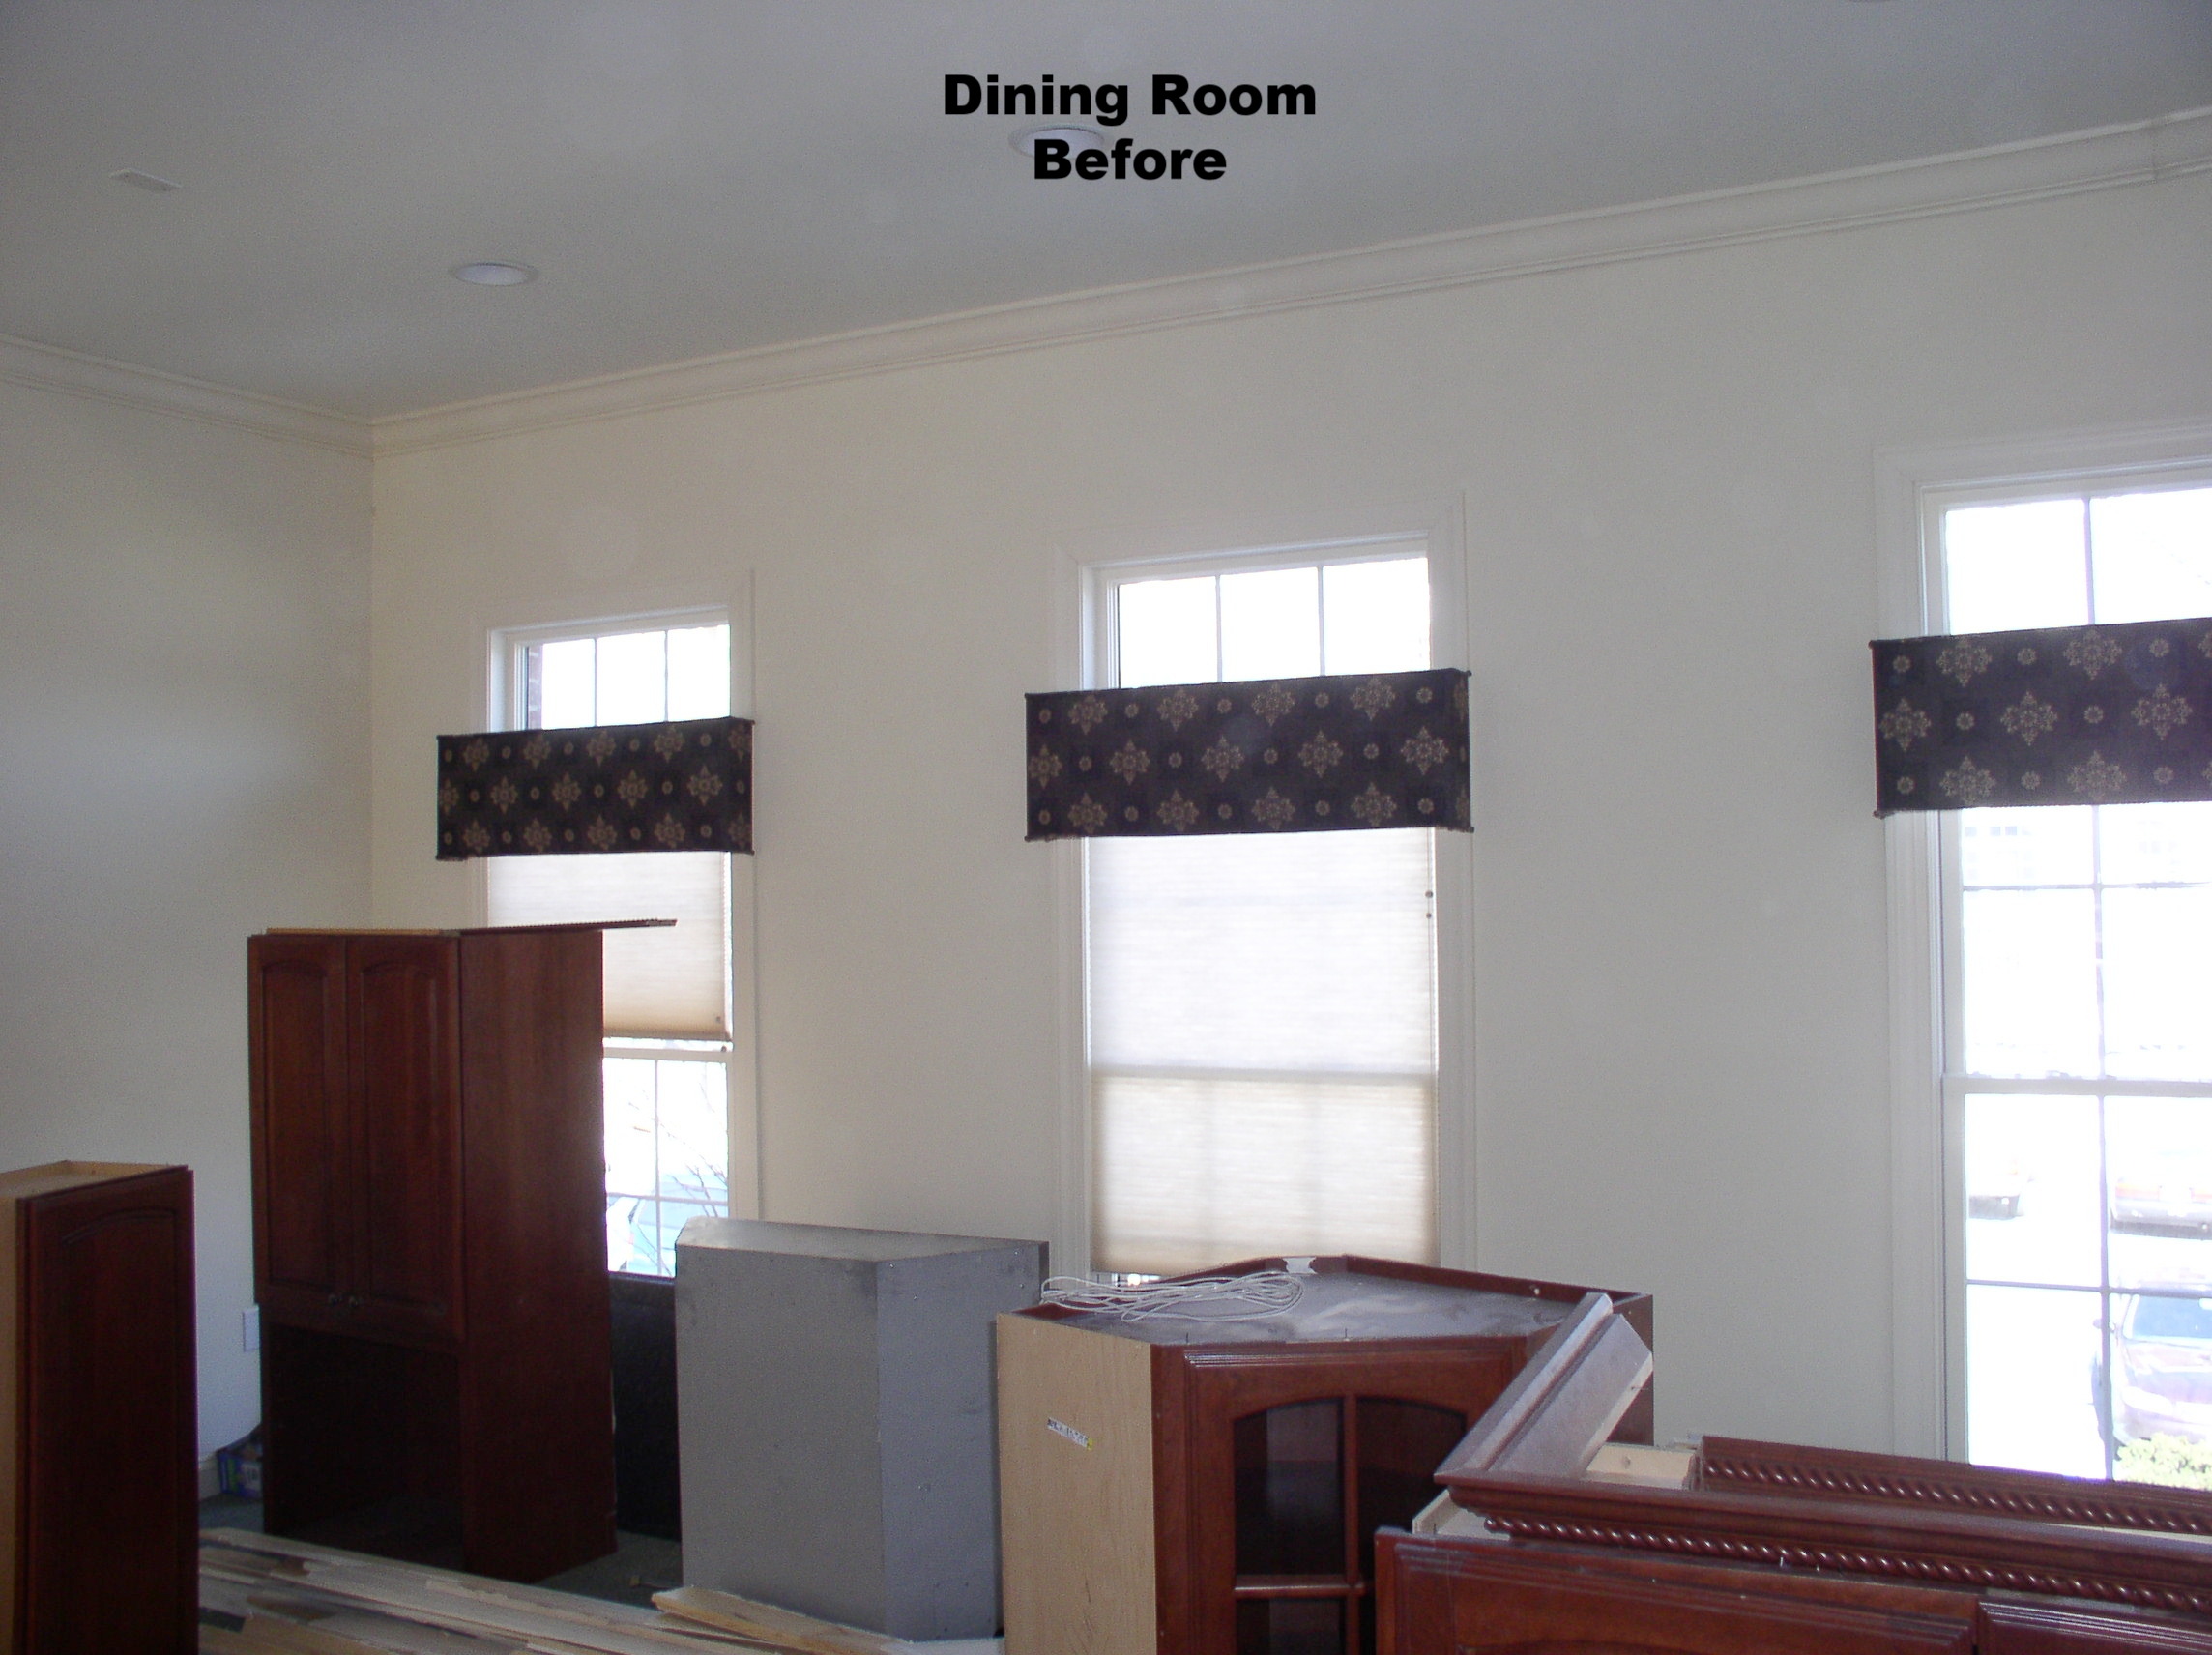 DINING ROOM BEFORE 